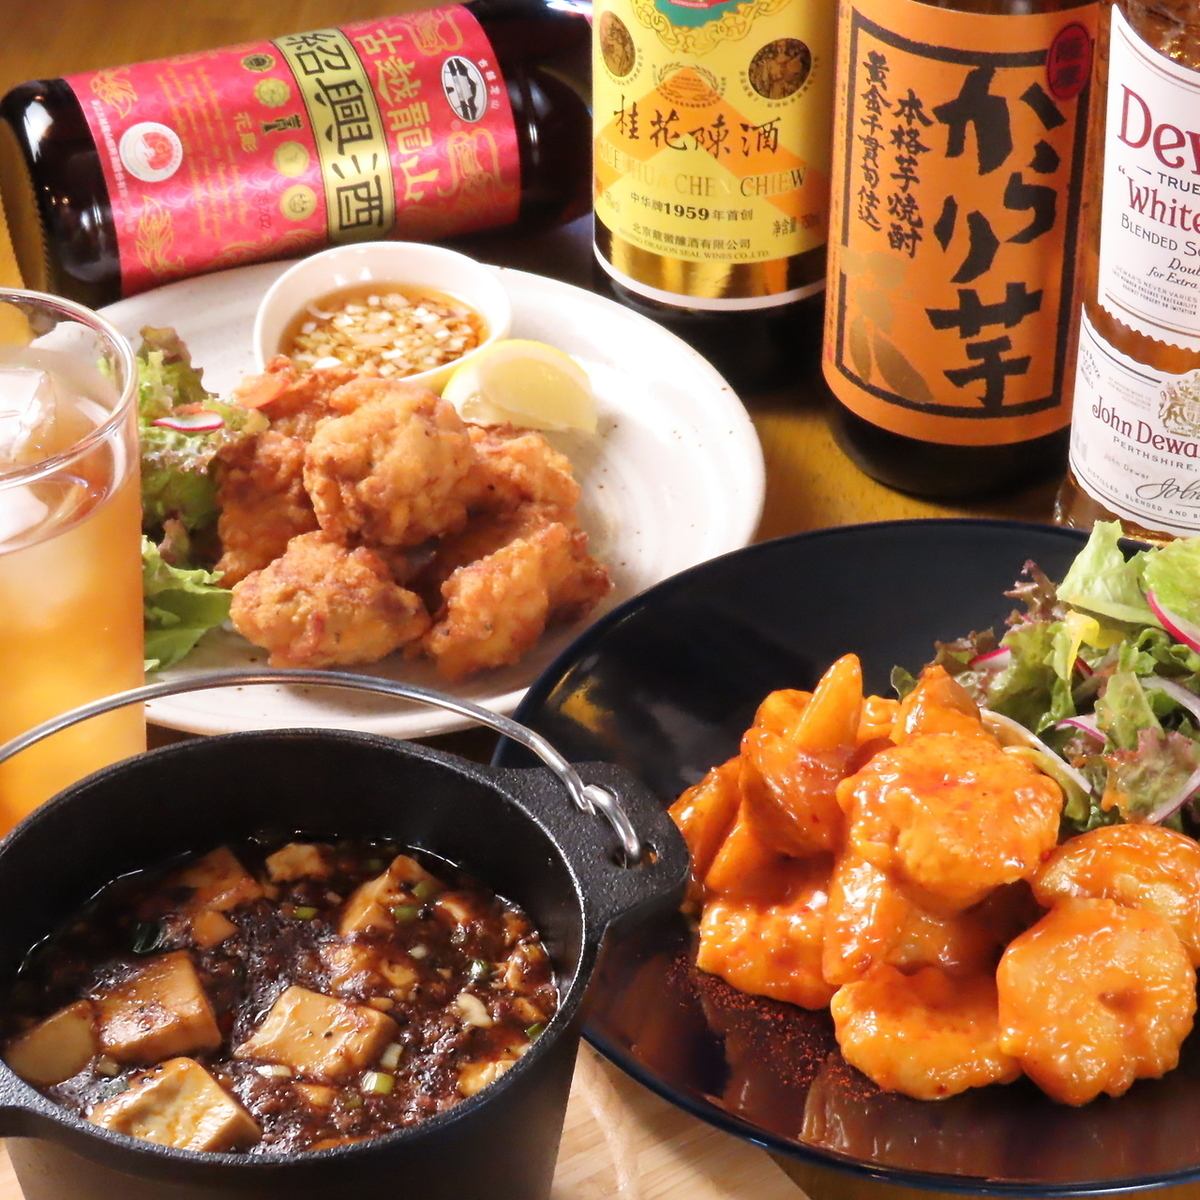 We have a wide selection of authentic Chinese dishes that go well with alcohol.